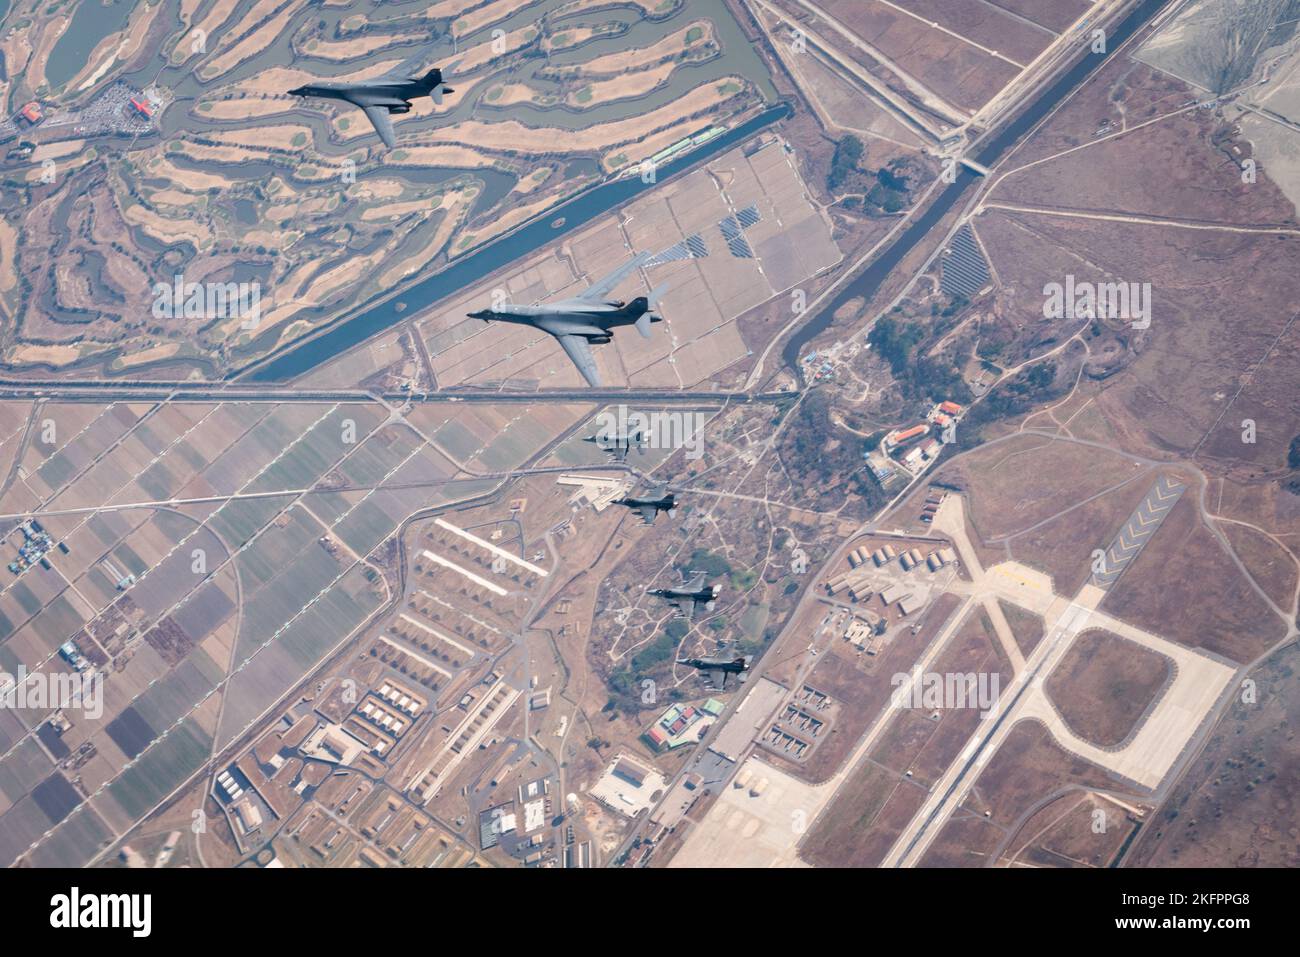 Korean Airspace, South Korea. 19th Nov, 2022. Two U.S. Air Force B-1B Lancer stealth strategic bomber aircraft, are escorted by U.S. Air Force F-16 fighter aircraft and South Korean F-35A stealth fighters during a formation flight in the Korean Air Defense Identification Zone, November 19, 2022, over South Korea. The show of force flight is in response to multiple North Korean missile launches. Credit: SrA Megan Estrada/U.S. Air Force Photo/Alamy Live News Stock Photo